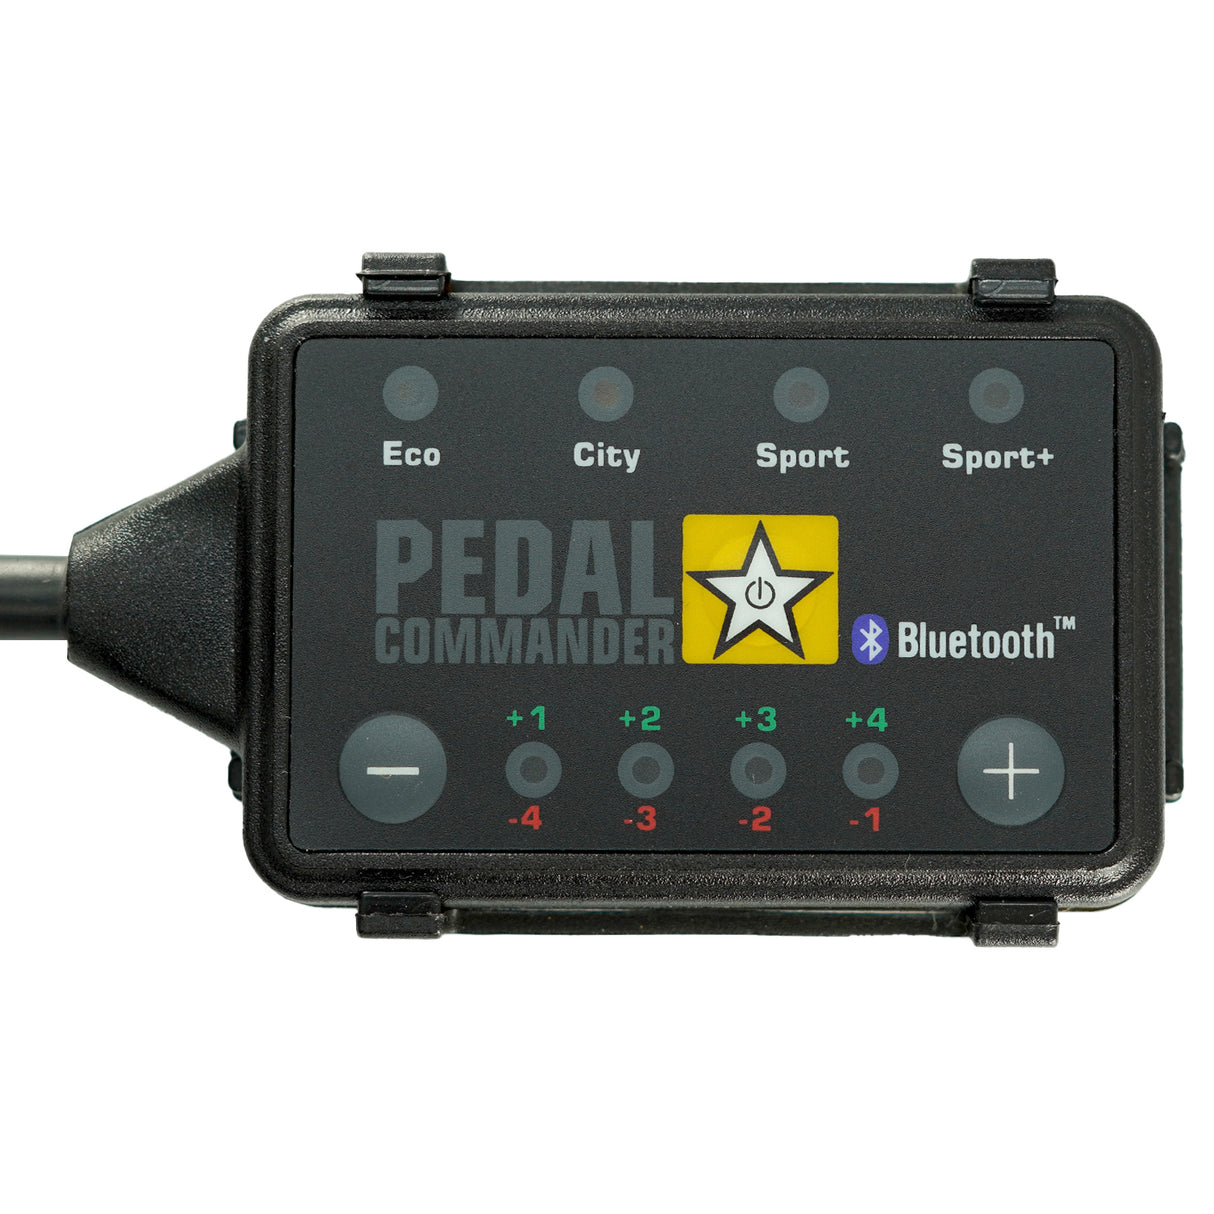 Pedal Commander 07-RAM-PM3-01 Pedal Commander Throttle Response Controller with Bluetooth Support - Roam Overland Outfitters